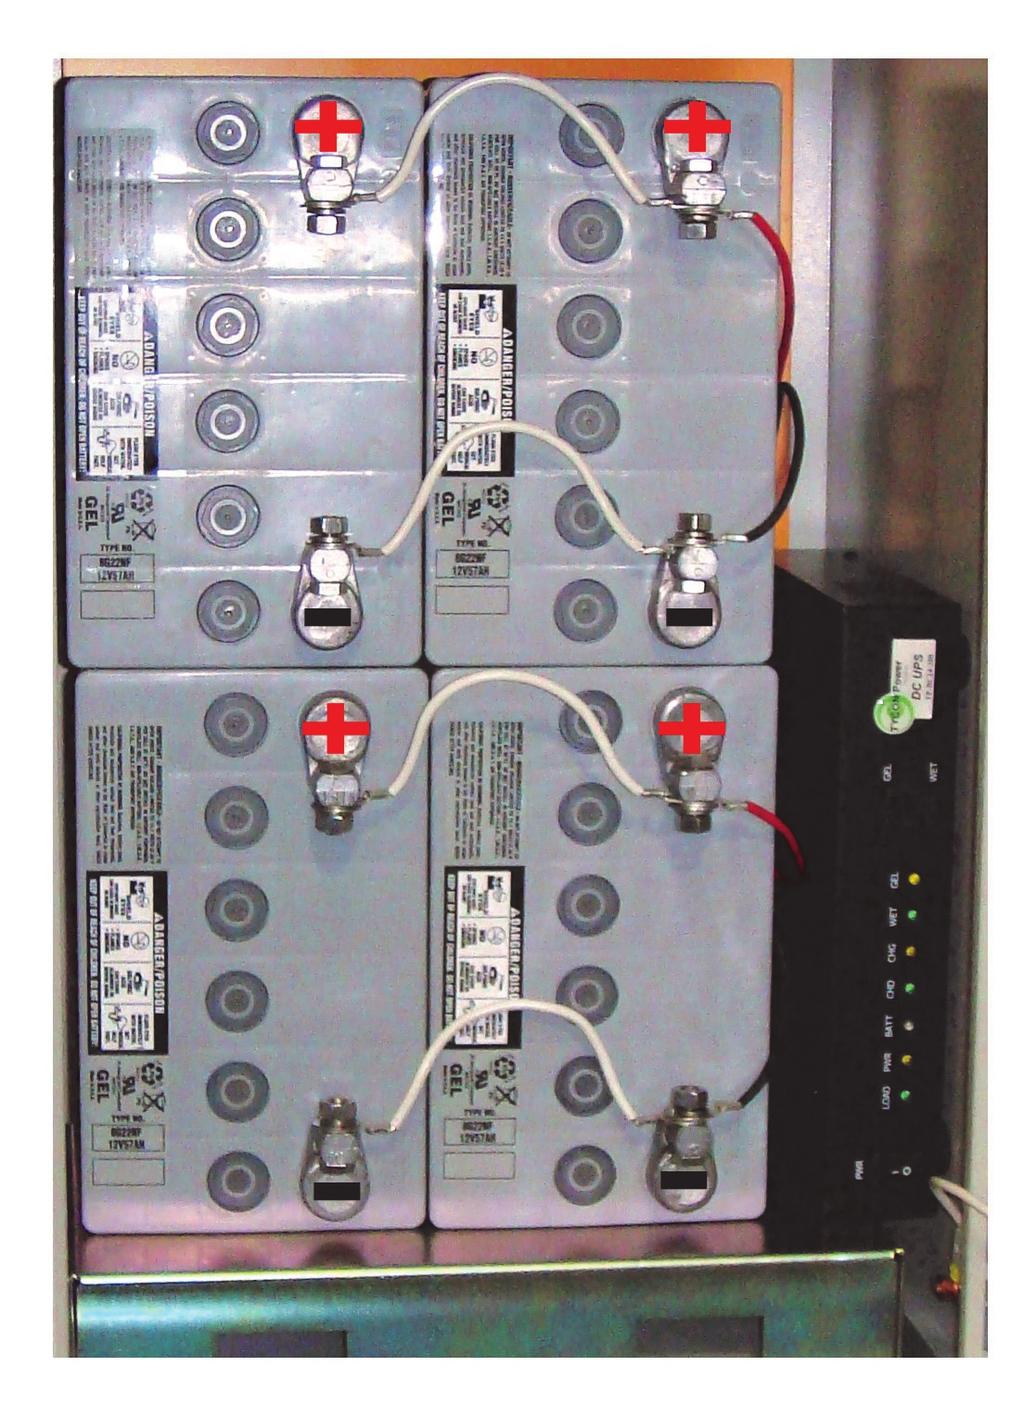 12V 200Ah battery configuration is shown here.